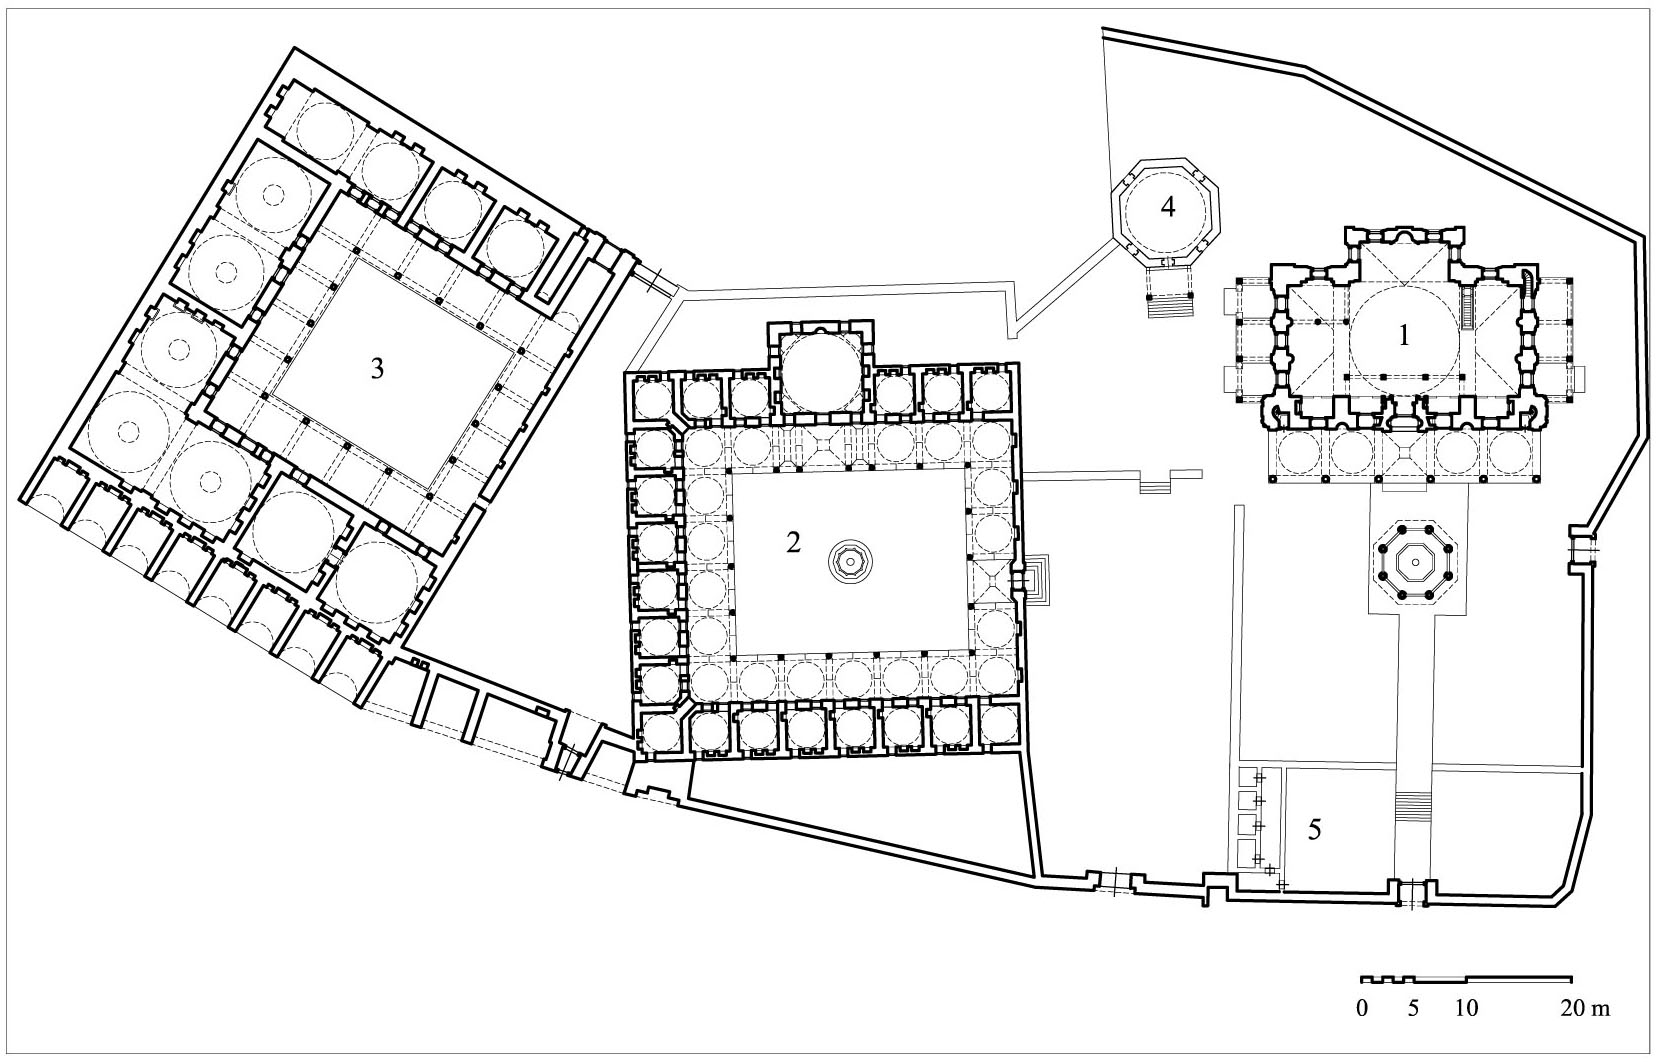 Muradiye Külliyesi - Floor plan of the complex showing (1) mosque, (2) madrasa, (3) hospice and guesthouse (hypothetical reconstruction), (4) library (1812), (5) latrines